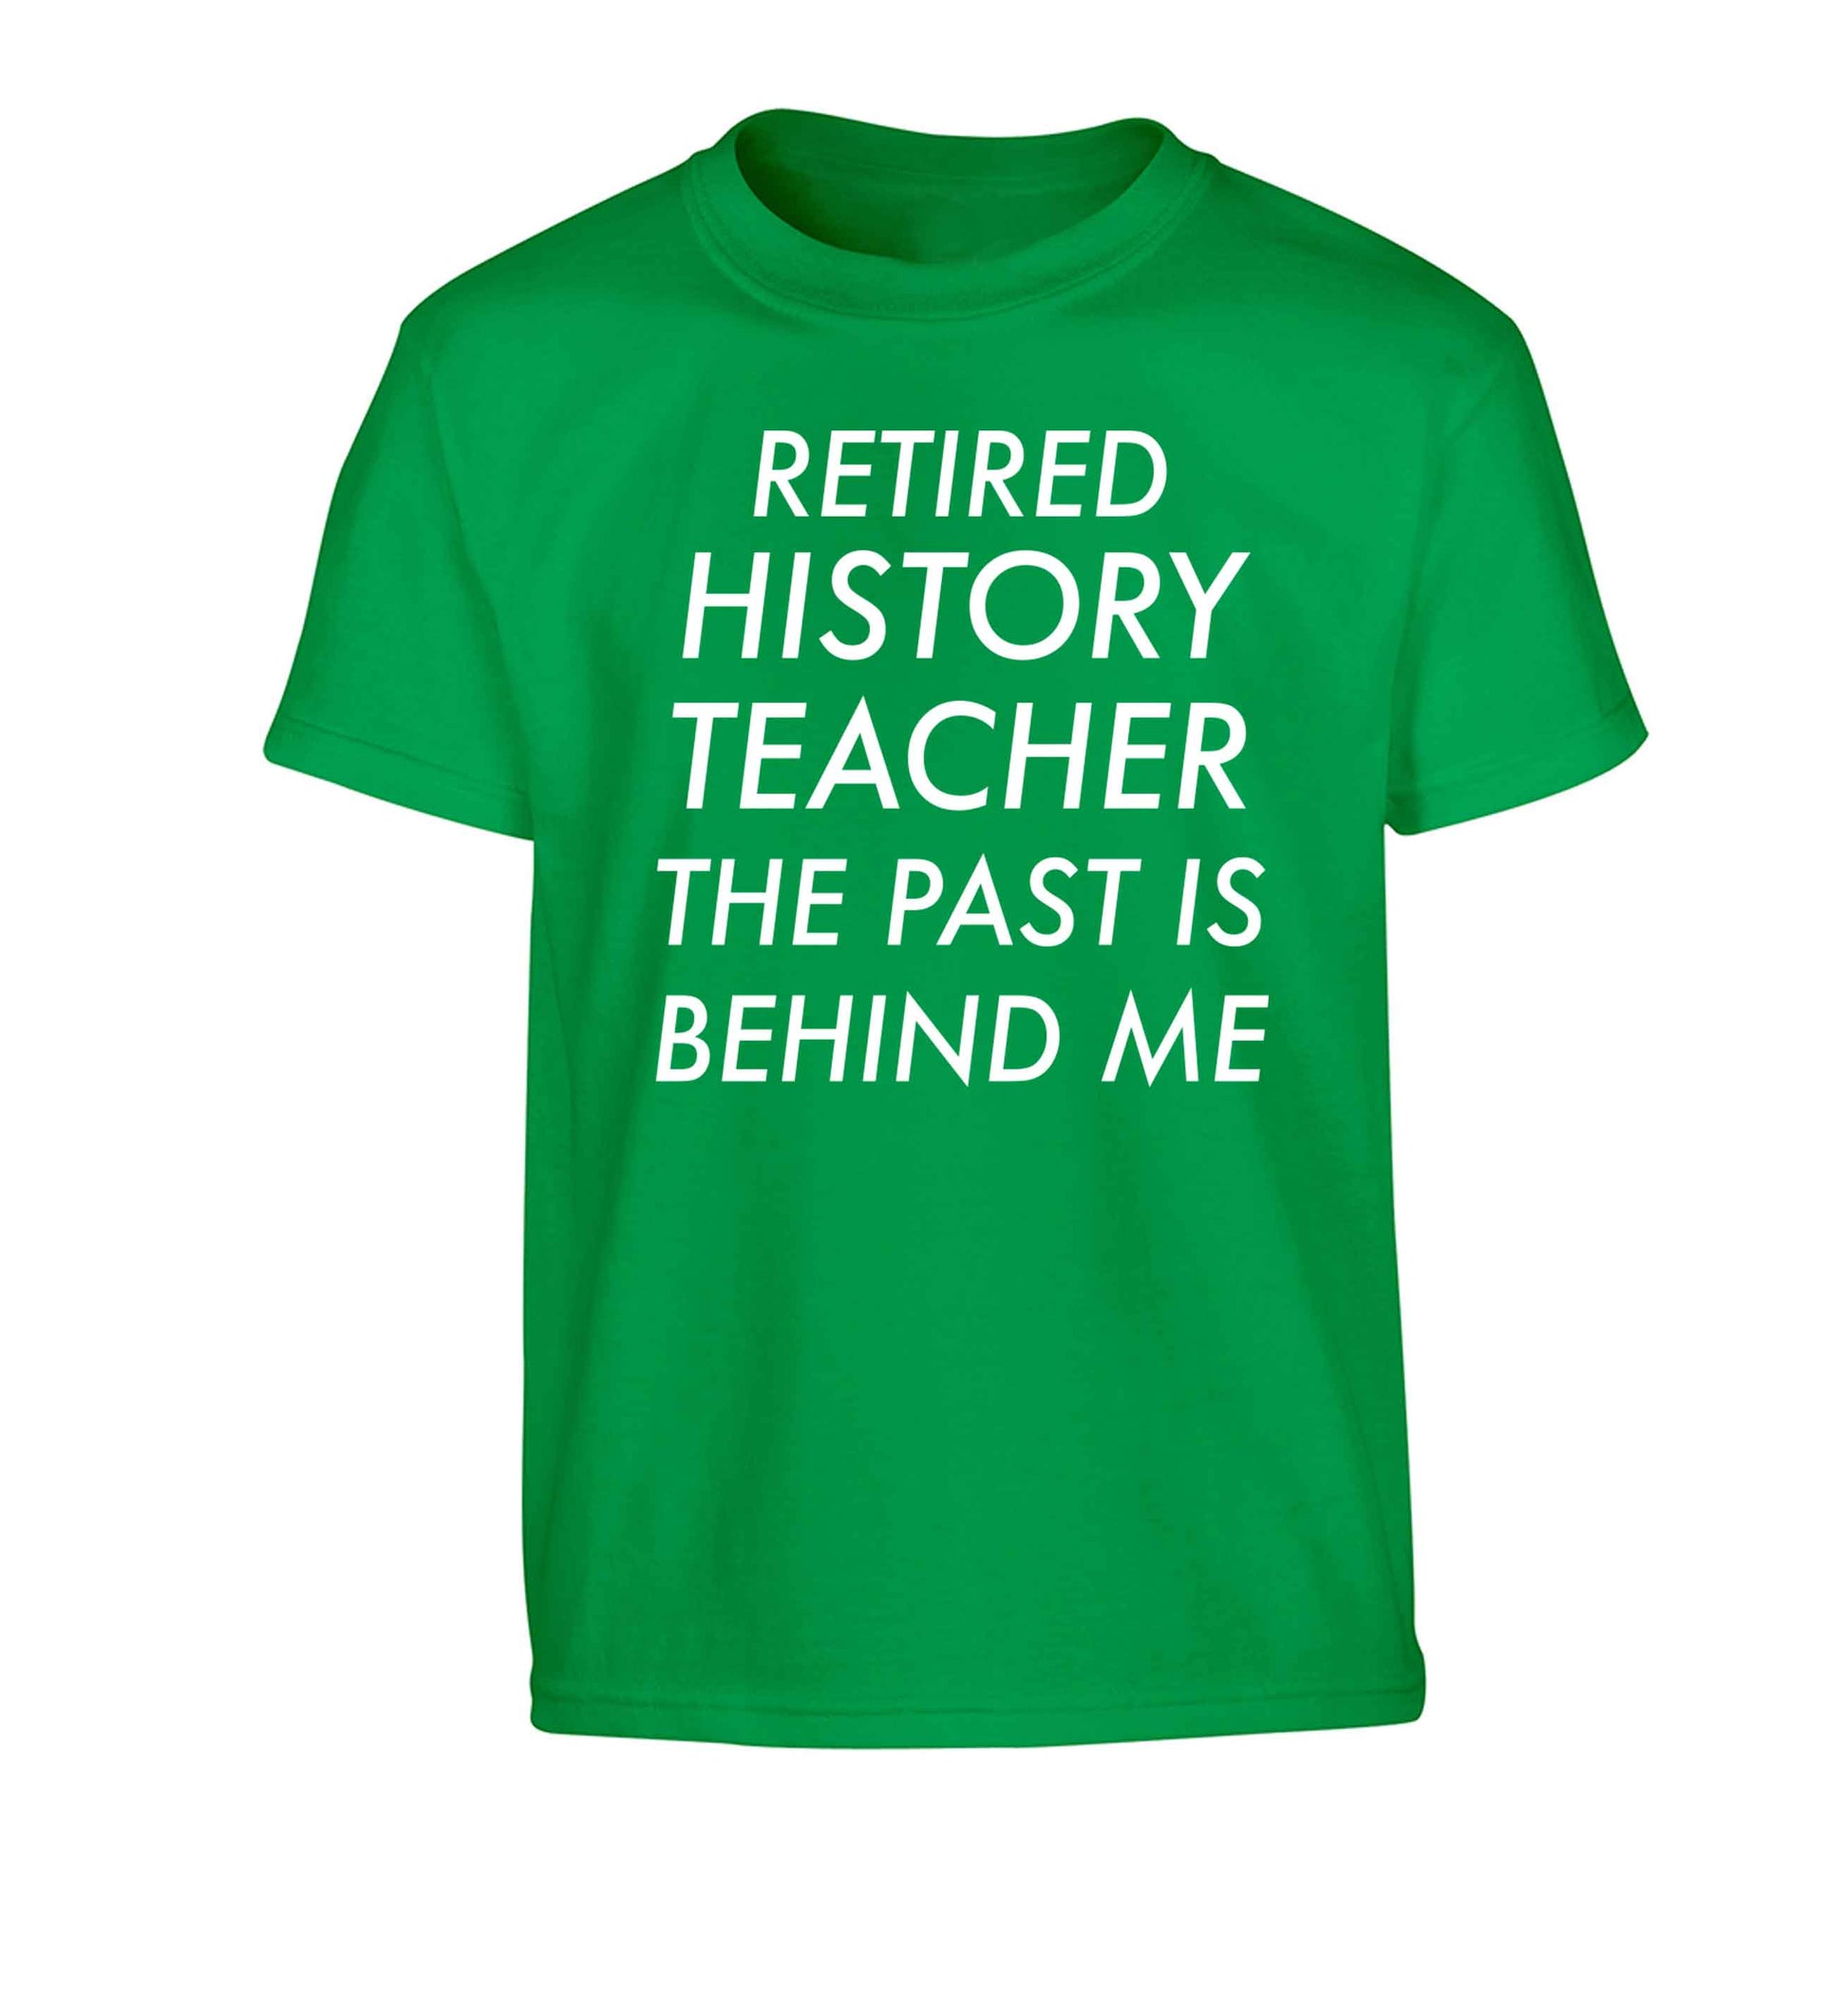 Retired history teacher the past is behind me Children's green Tshirt 12-13 Years